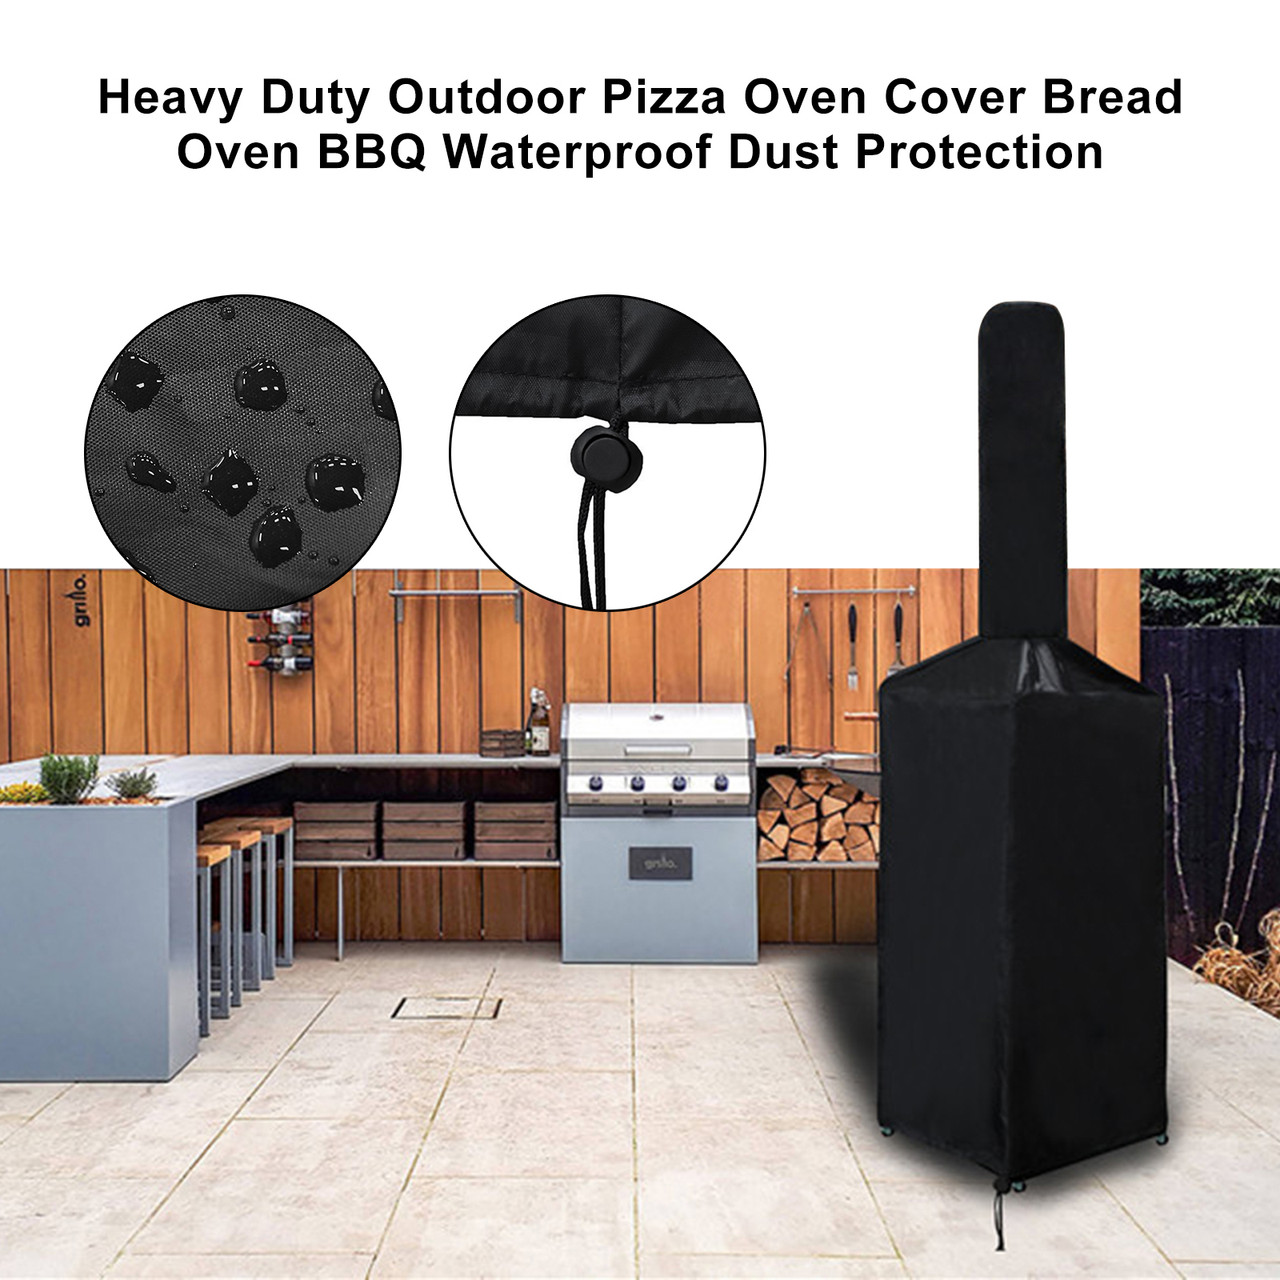 50*37*103*160cm Heavy Duty Outdoor Pizza Oven Cover Bread Oven BBQ Waterproof Dust Protection